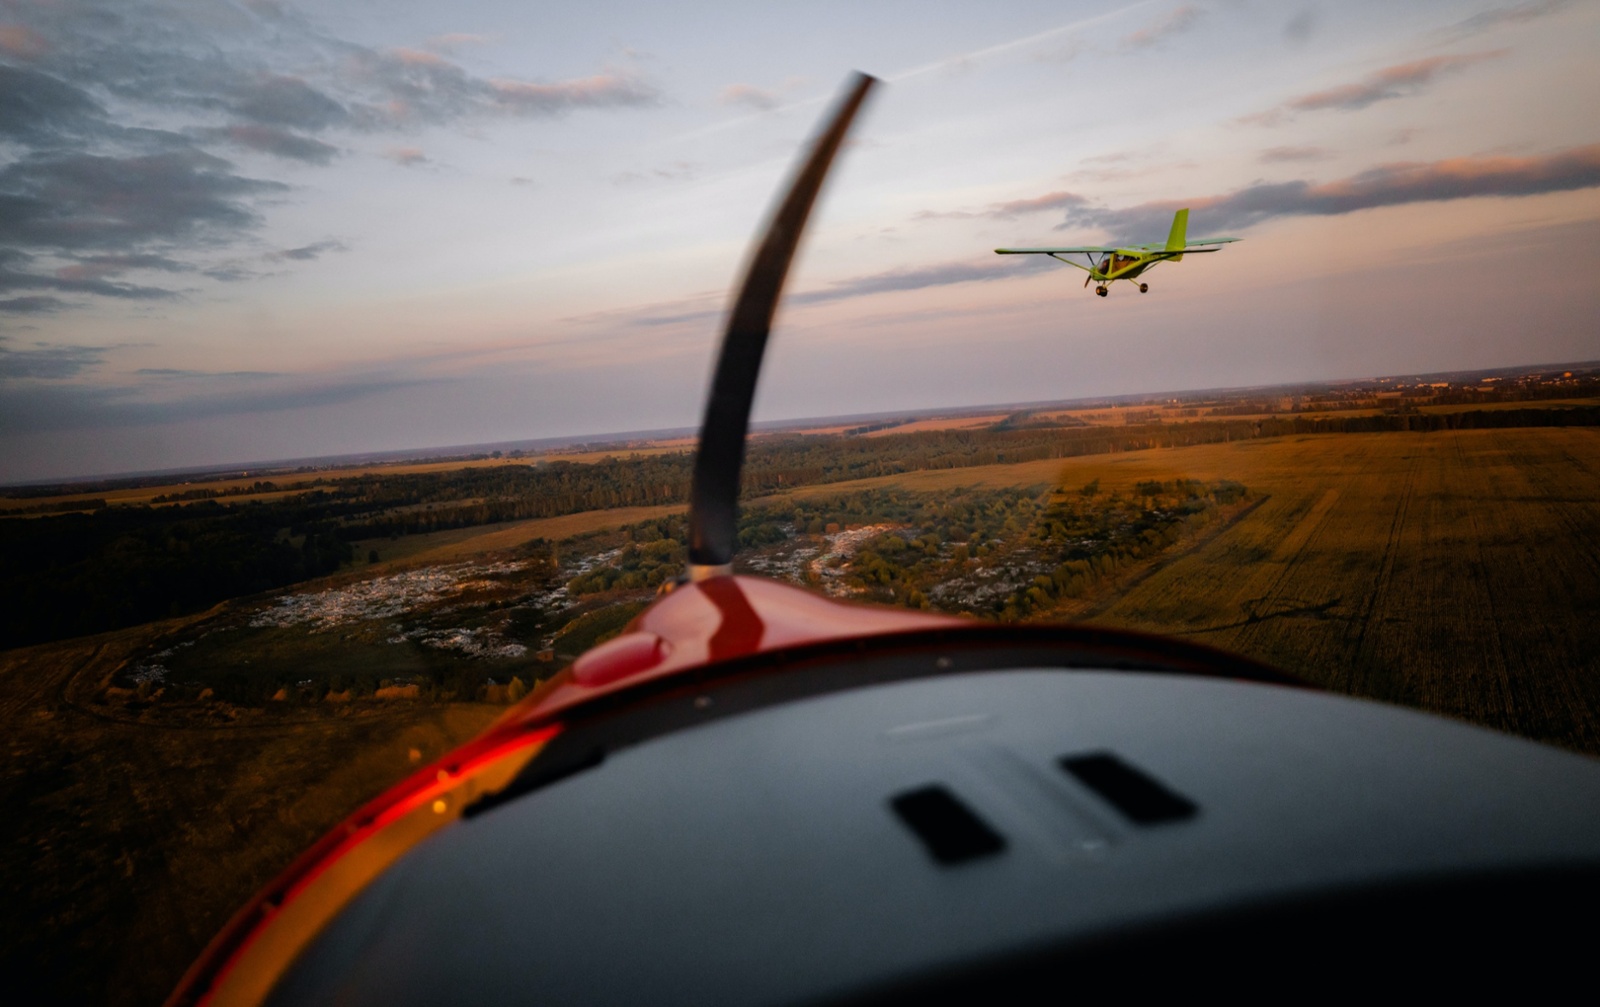 Two general aviation airplanes flying over a rural landscape